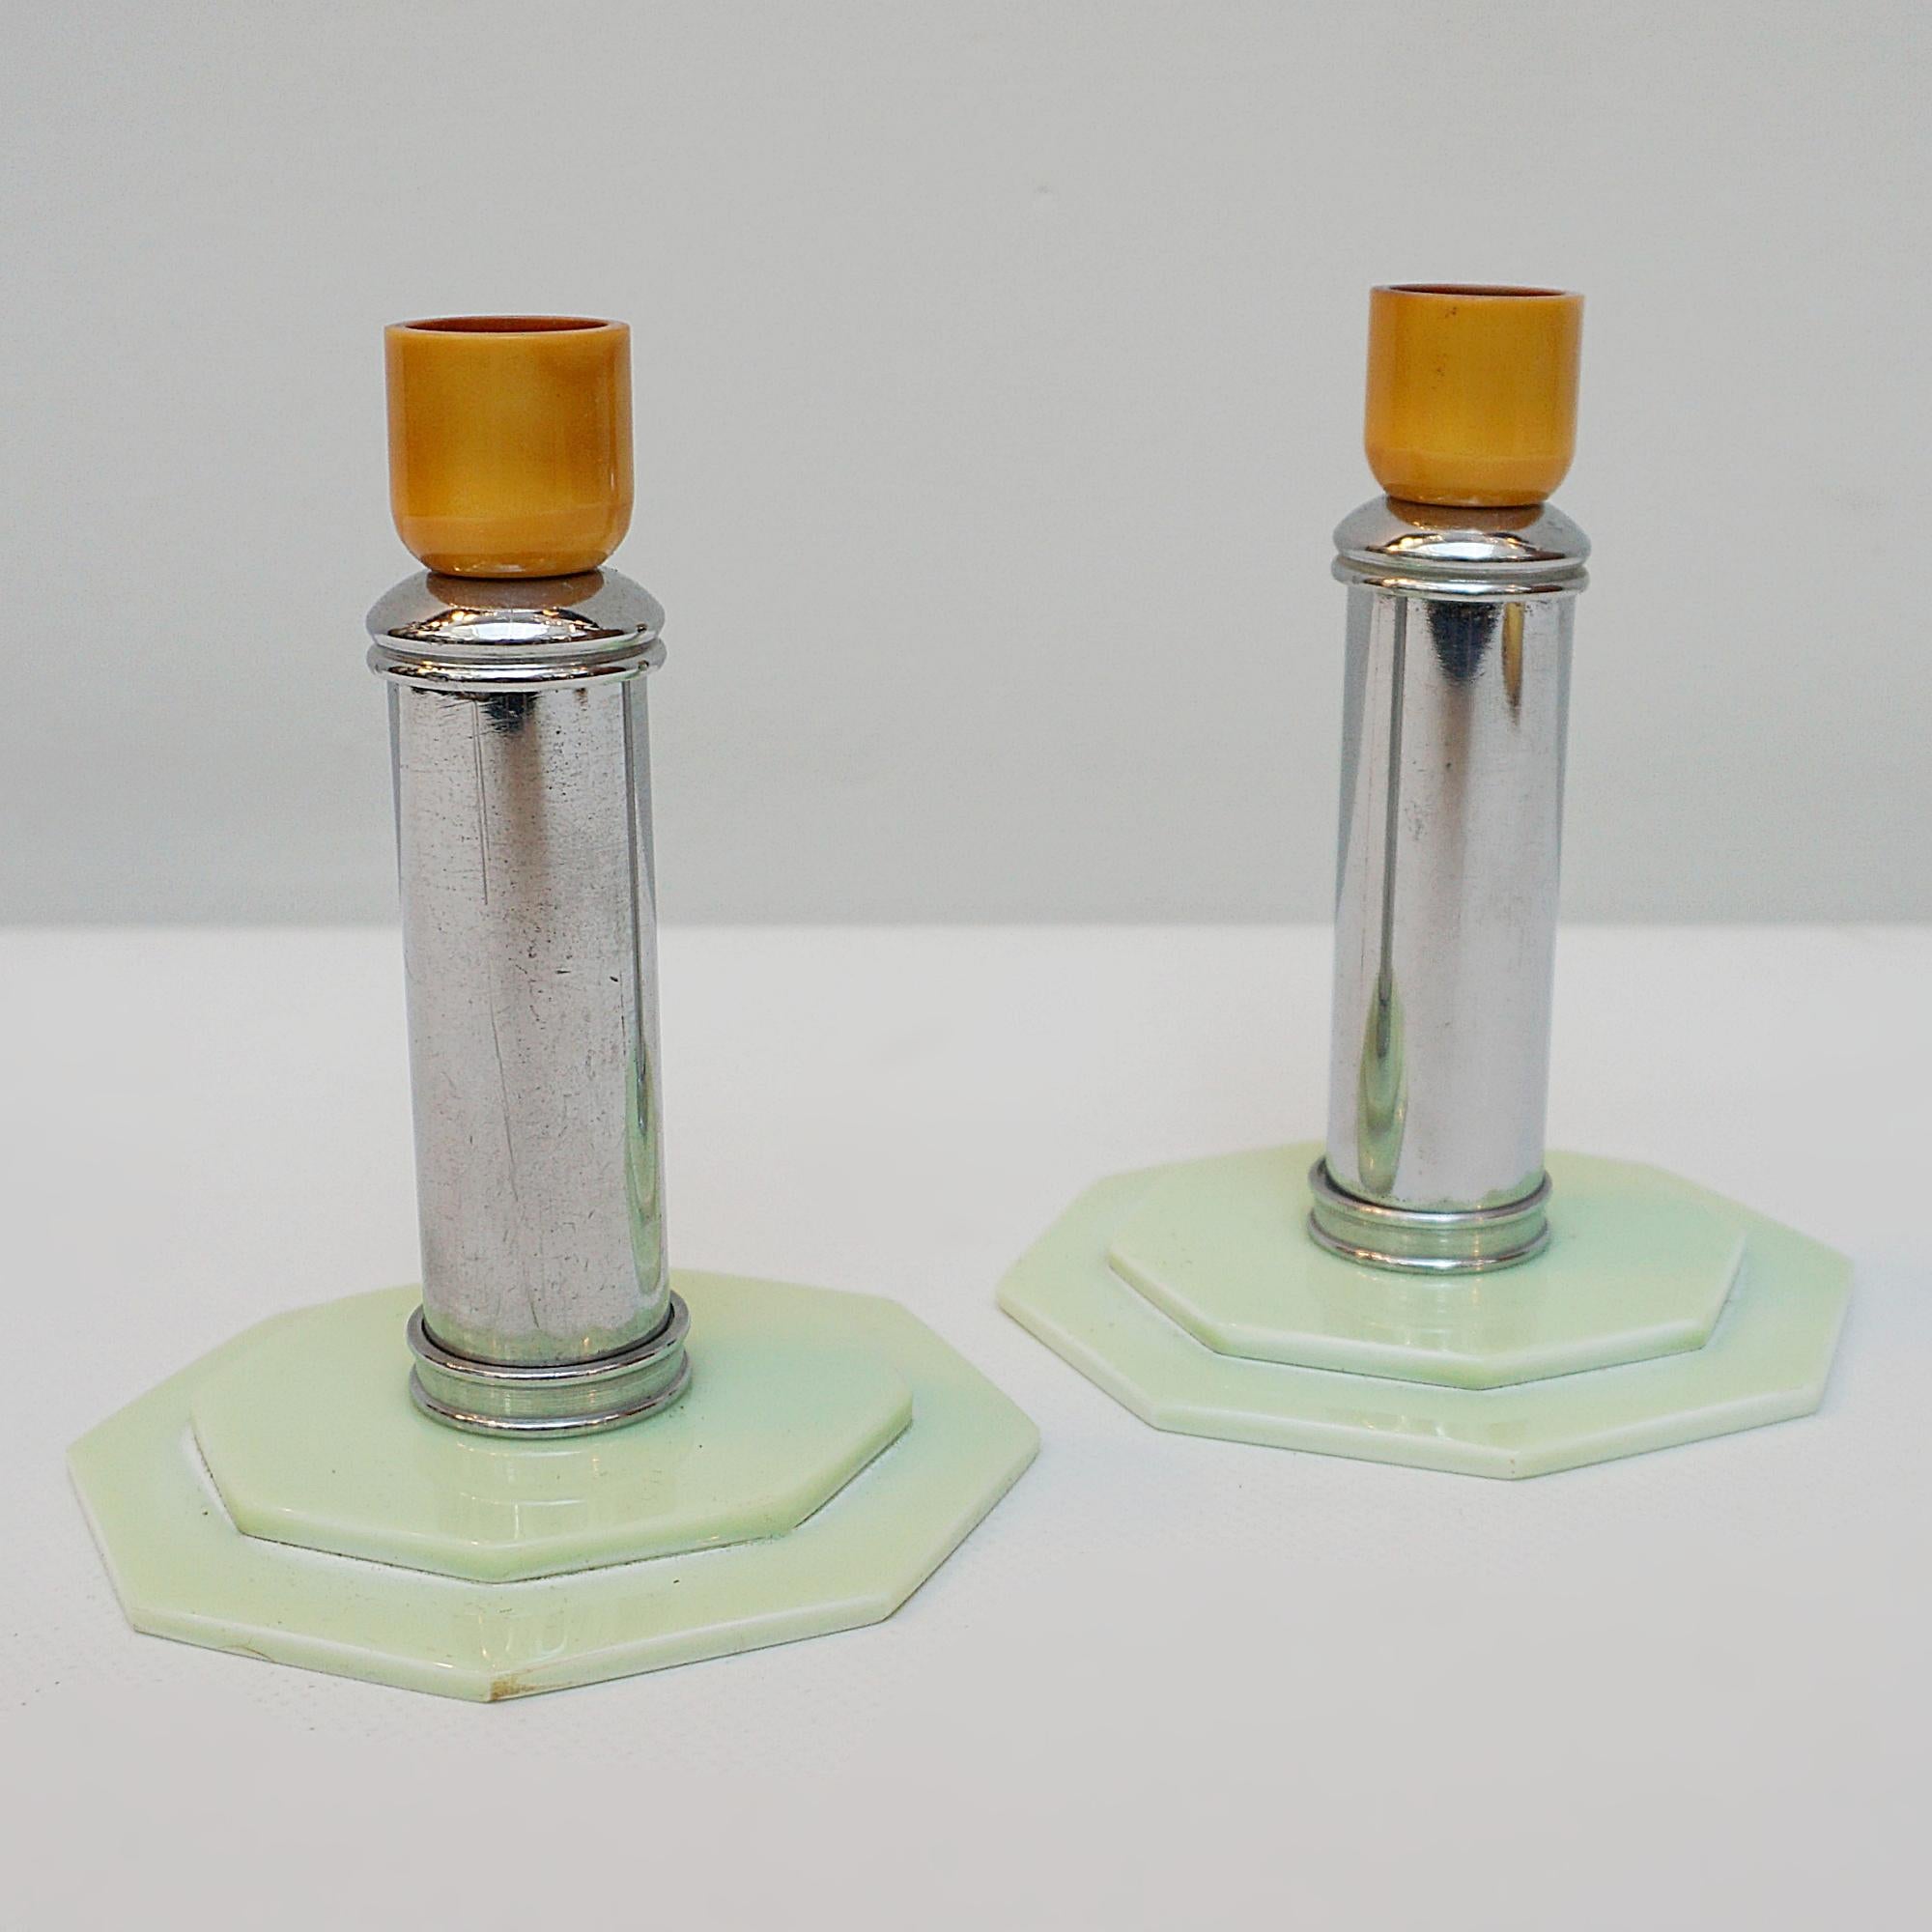 A pair of Art Deco style candlesticks. A chromed cylindrical stem, set over an octagonal mint stepped bakelite base. Amber bakelite candle cup top.

Dimensions: H 13cm W 10cm

Origin: English

Item Number: 0812232

Re-chromed and polished with some